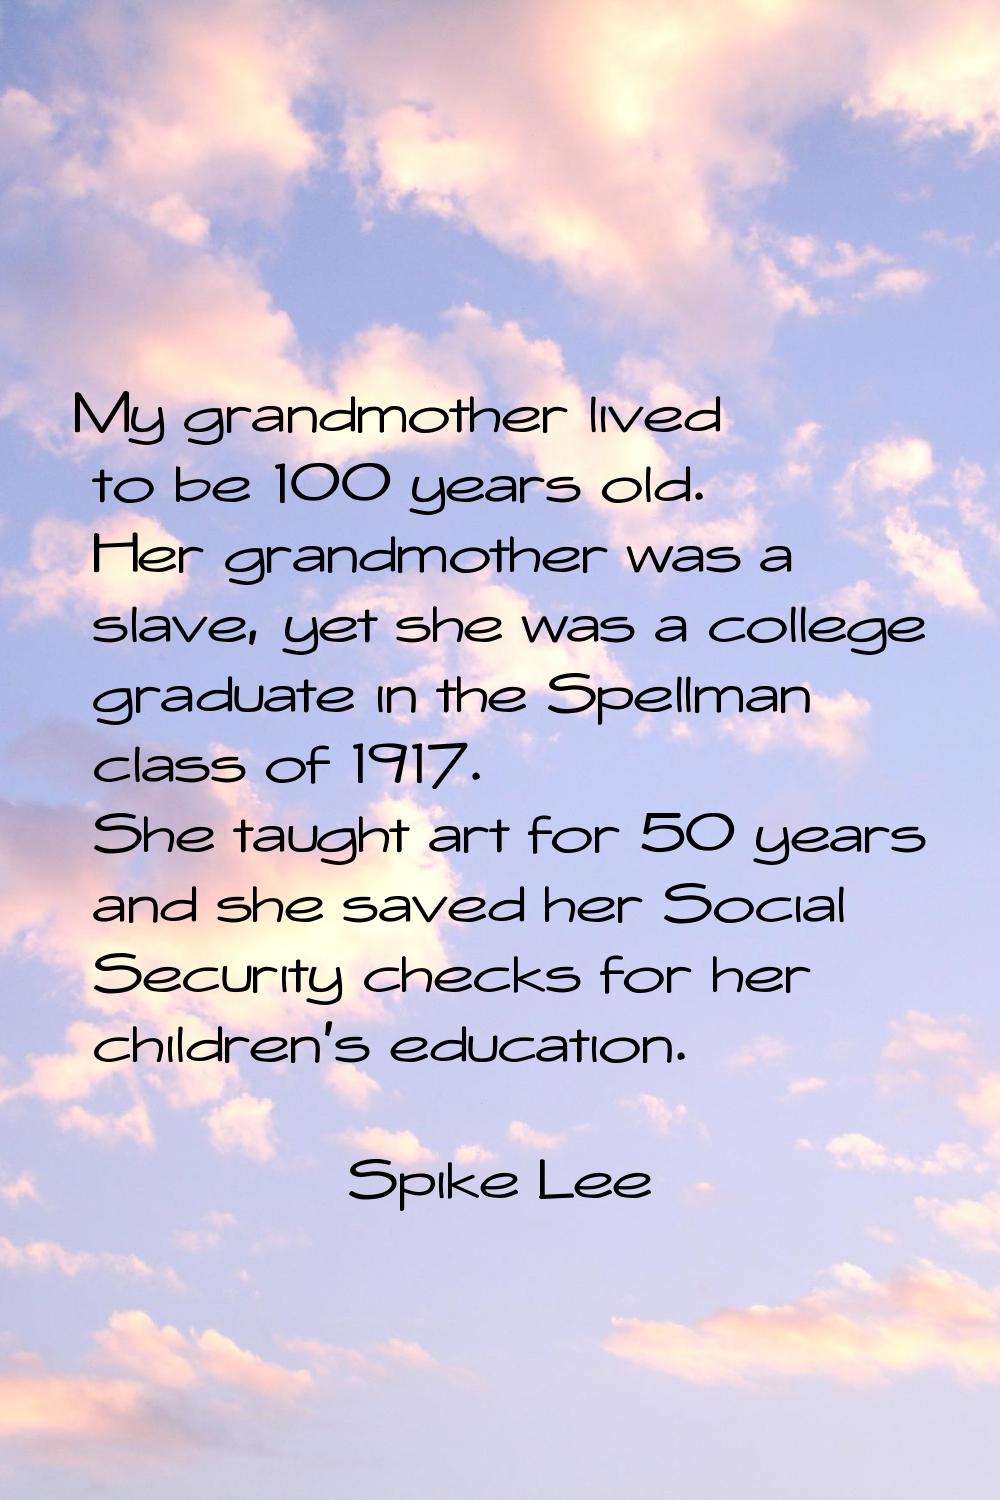 My grandmother lived to be 100 years old. Her grandmother was a slave, yet she was a college gradua